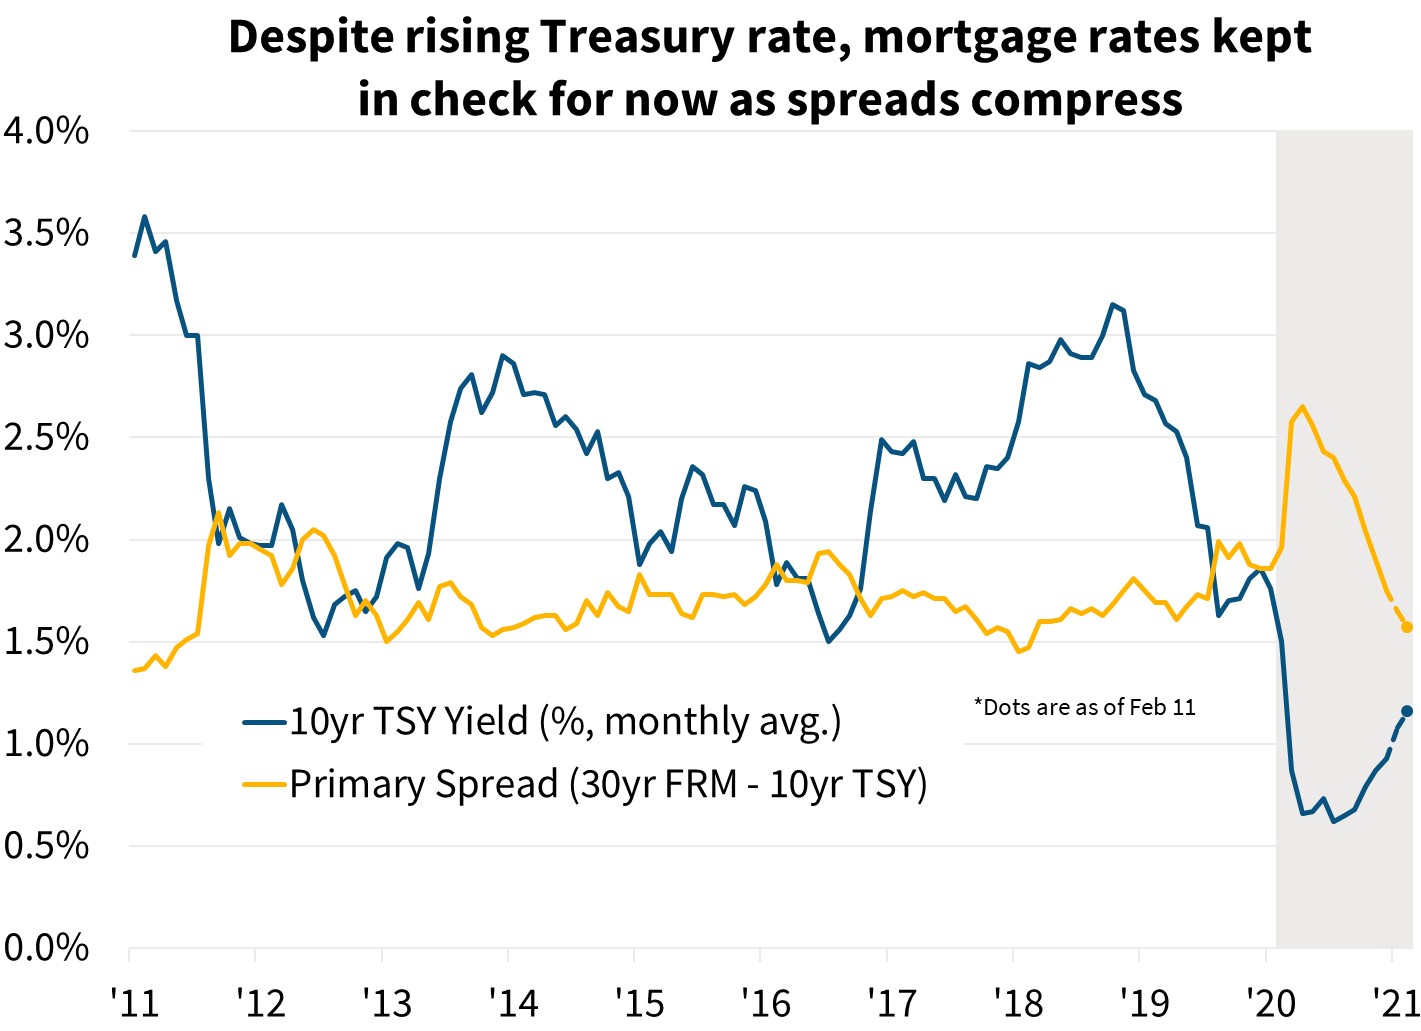 Despite rising Treasury rate mortgage rates kept in check for now as spreads compress
